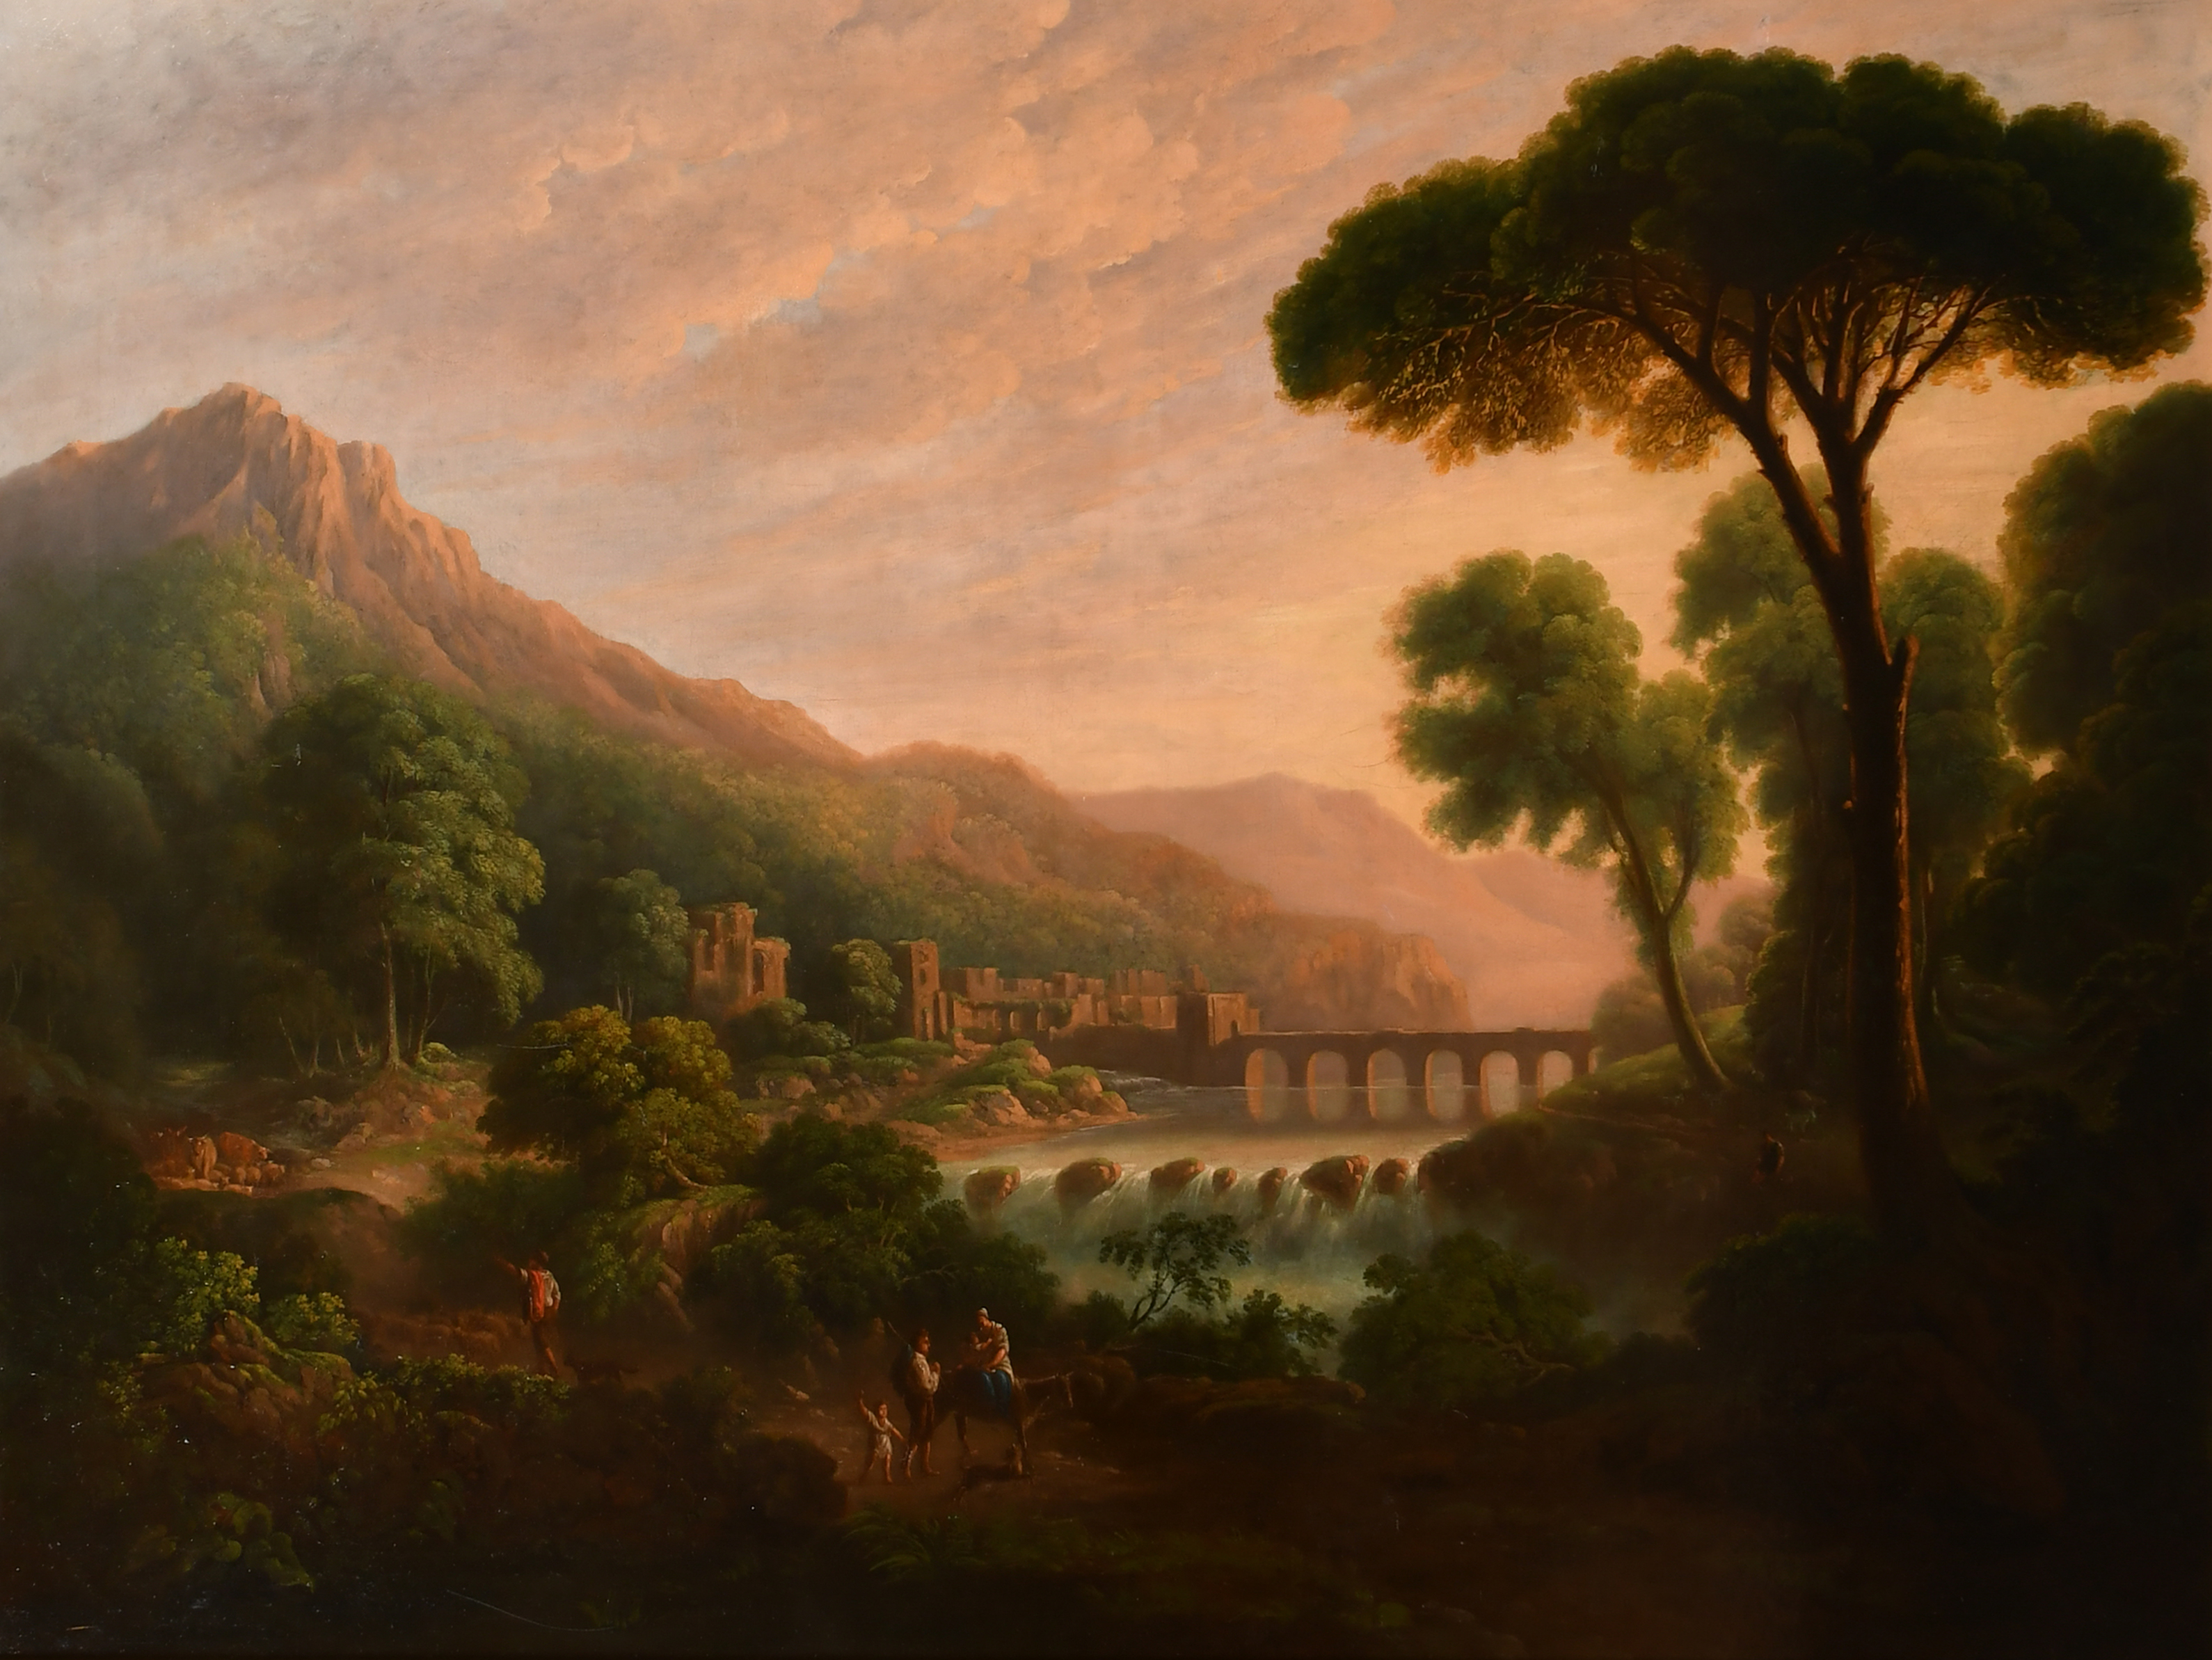 19th Century Italian School. Figures in an Extensive River Landscape, Oil on canvas, 36" x 48" (91.5